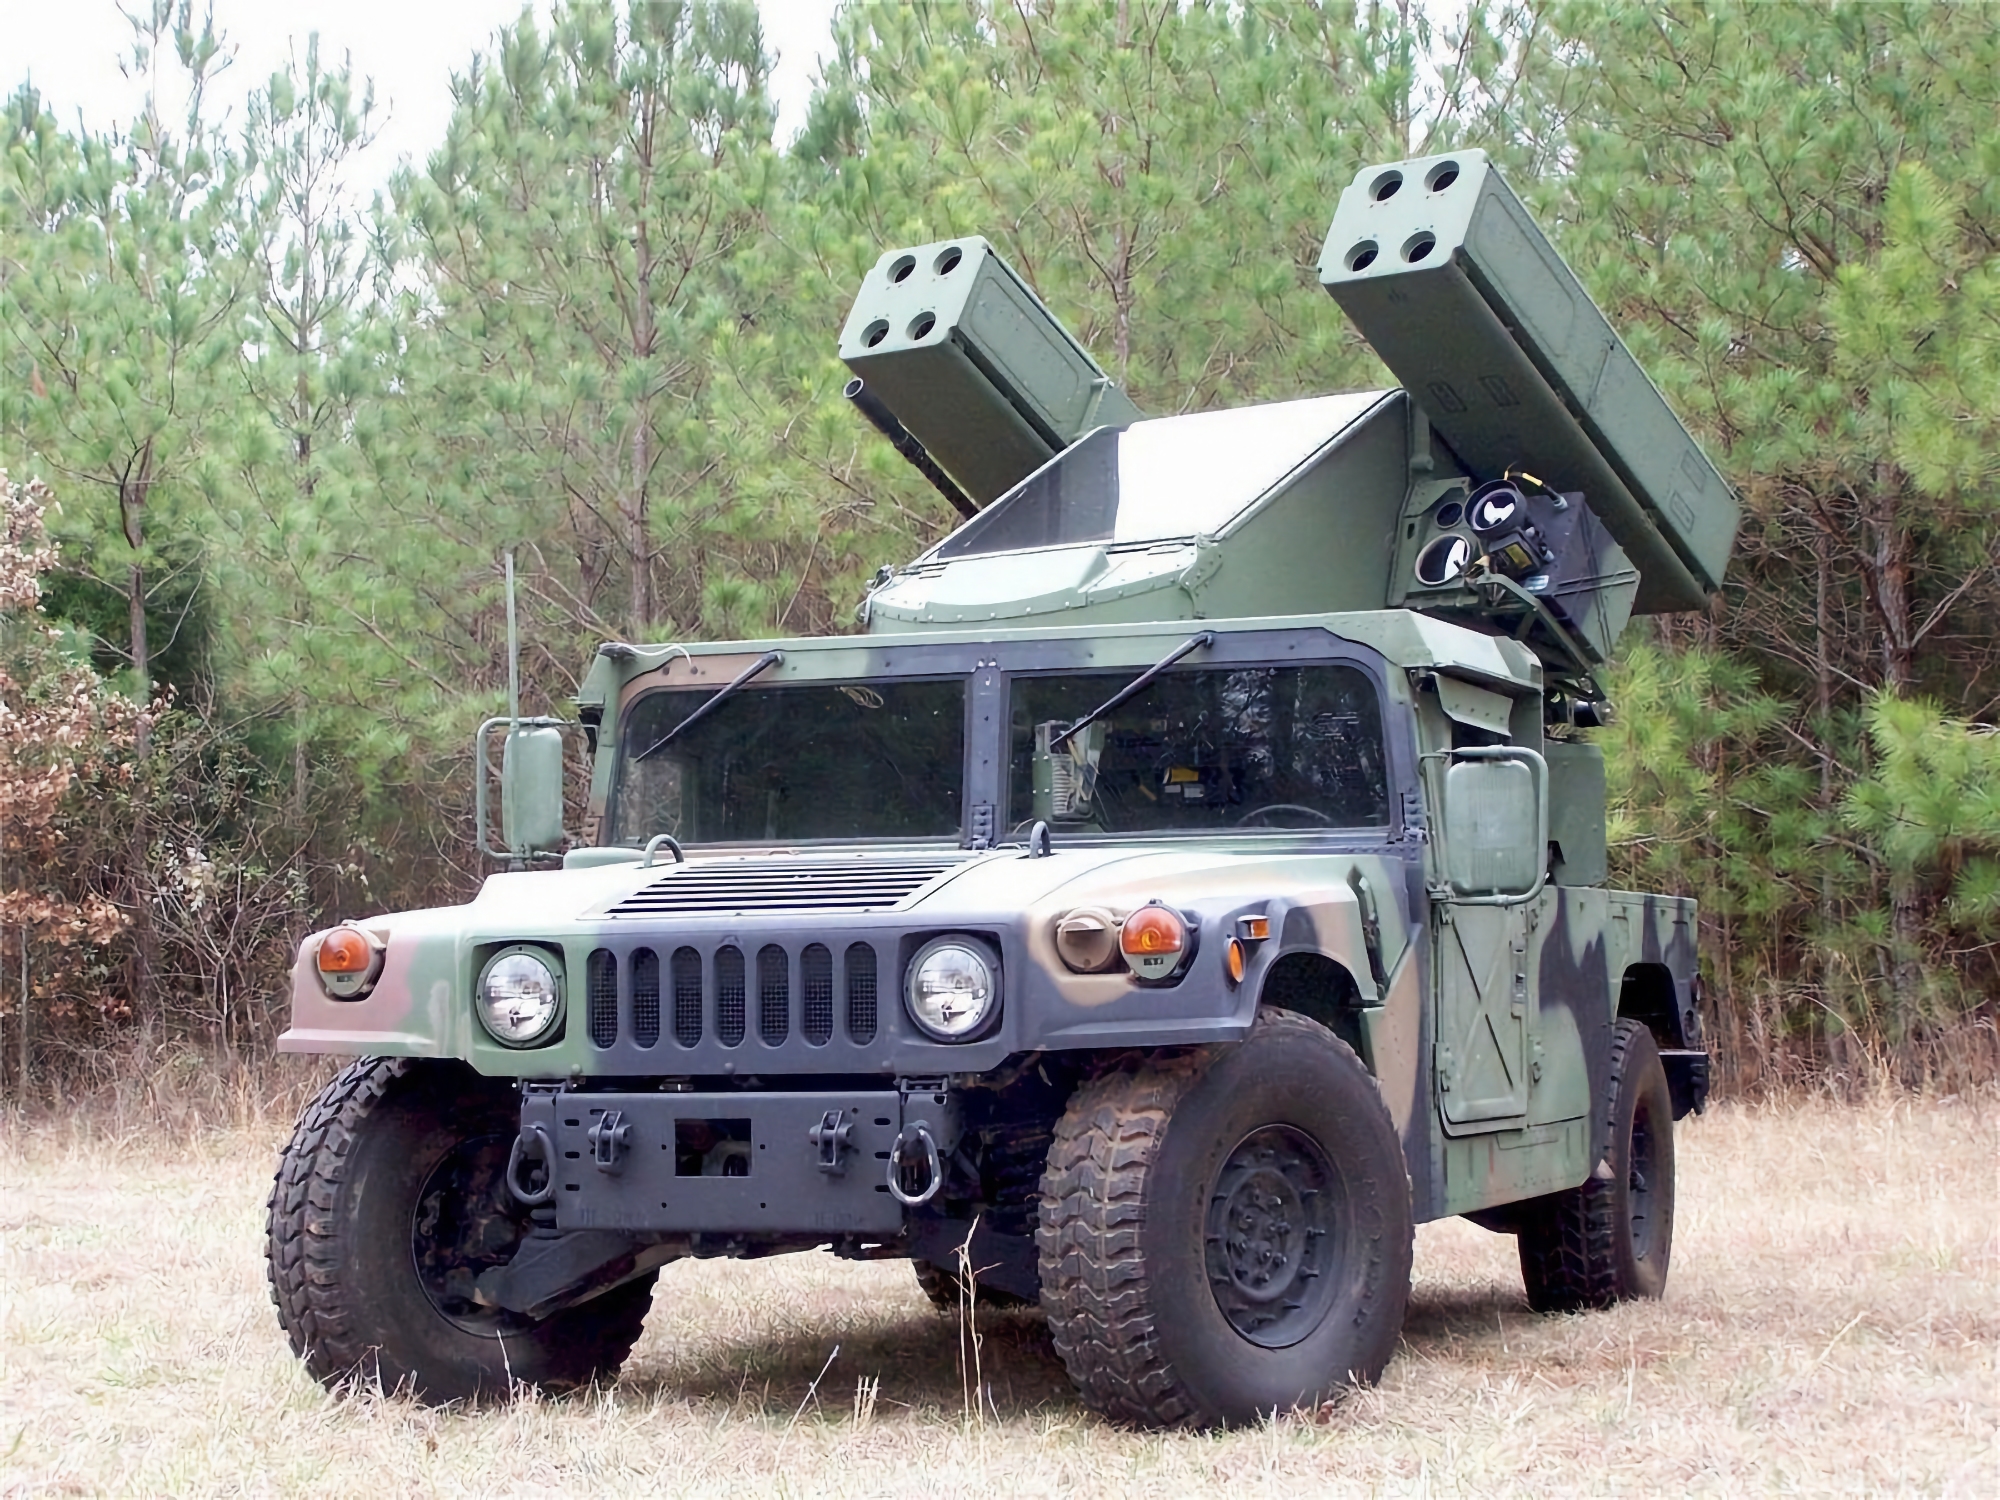 AFU receives AN/TWQ-1 Avenger SAM with Stinger missiles, capable of destroying air targets at up to 5.5km away